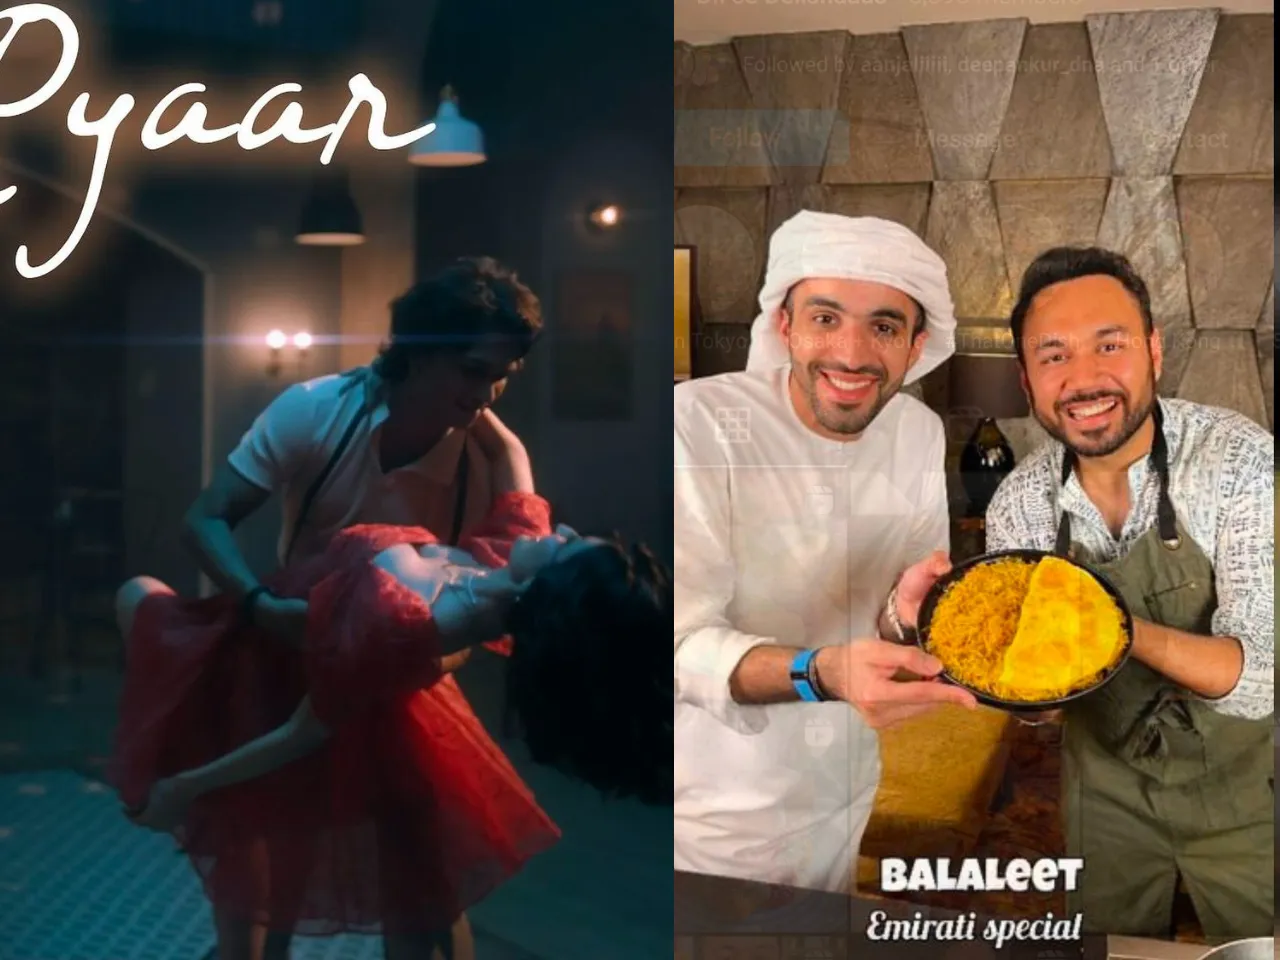 From Tanzeel Khan's new song to Saransh Goila's collaboration with Abdulnasser Alshaali, catch the latest social media coop